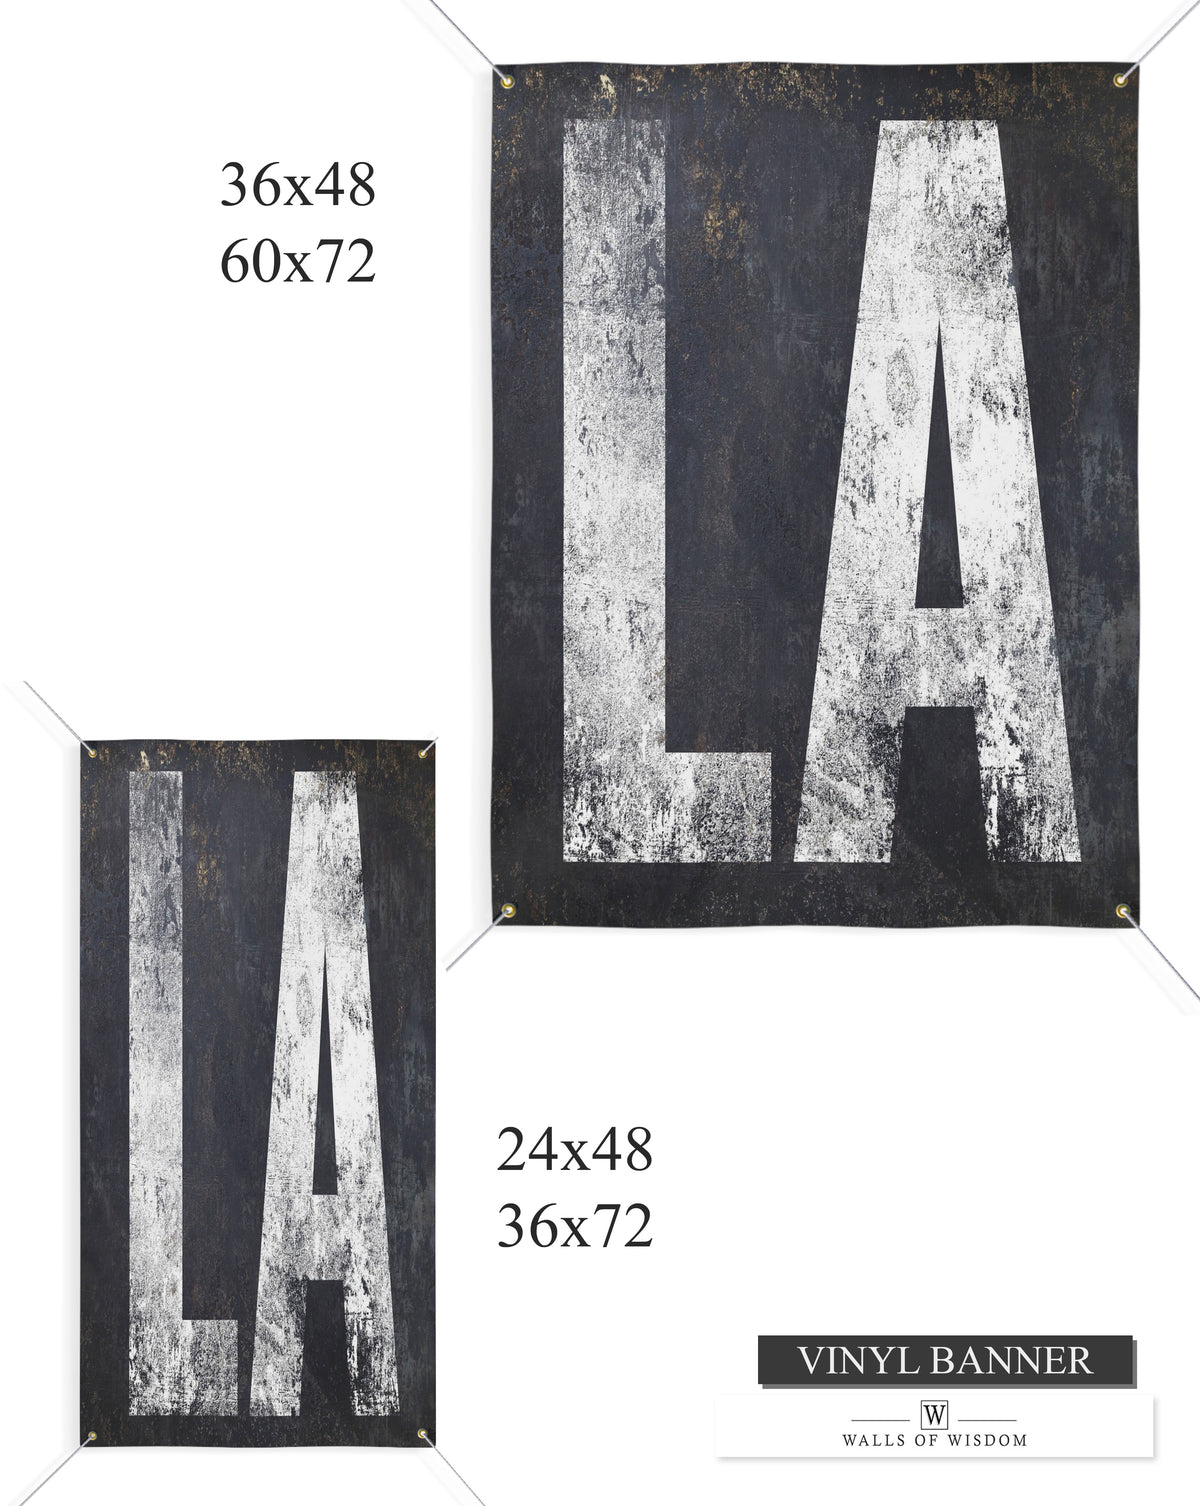 Louisiana Inspired Outdoor Vinyl Bar Sign -  LA State Distressed Typography for Patio & Garden Spaces